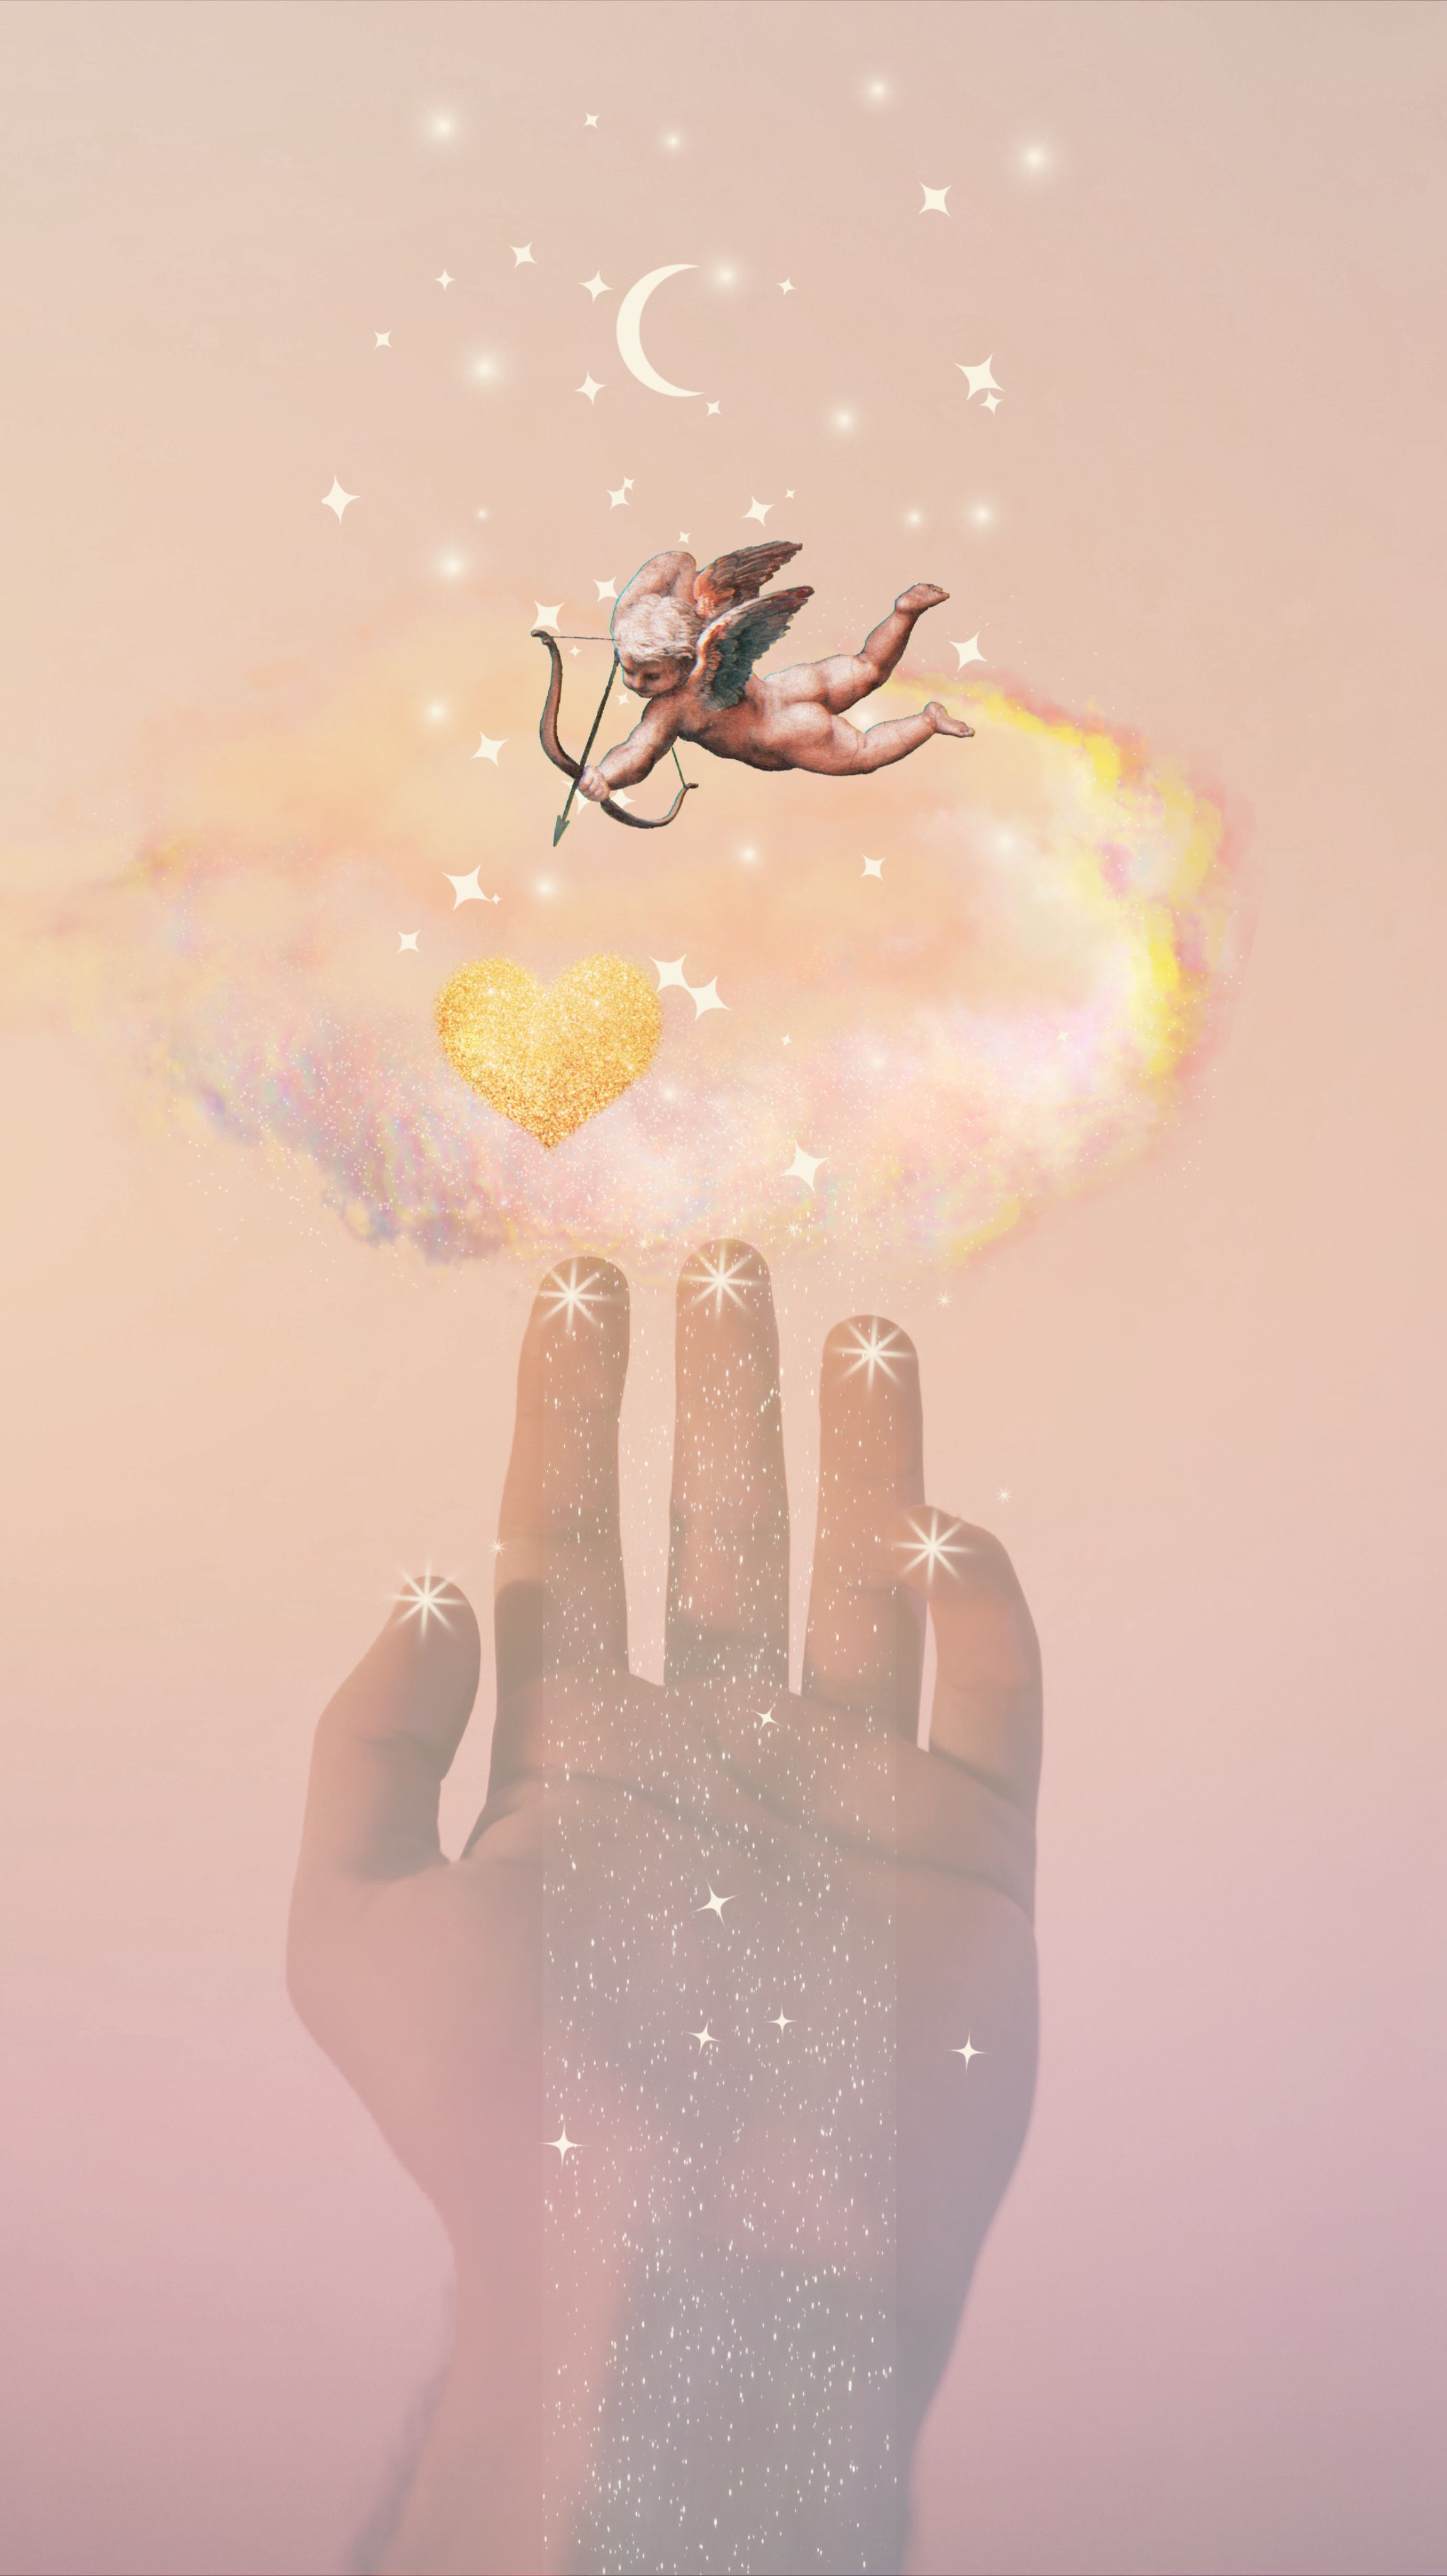 A hand reaching out to a golden heart held by an angel in the clouds. - Cupid